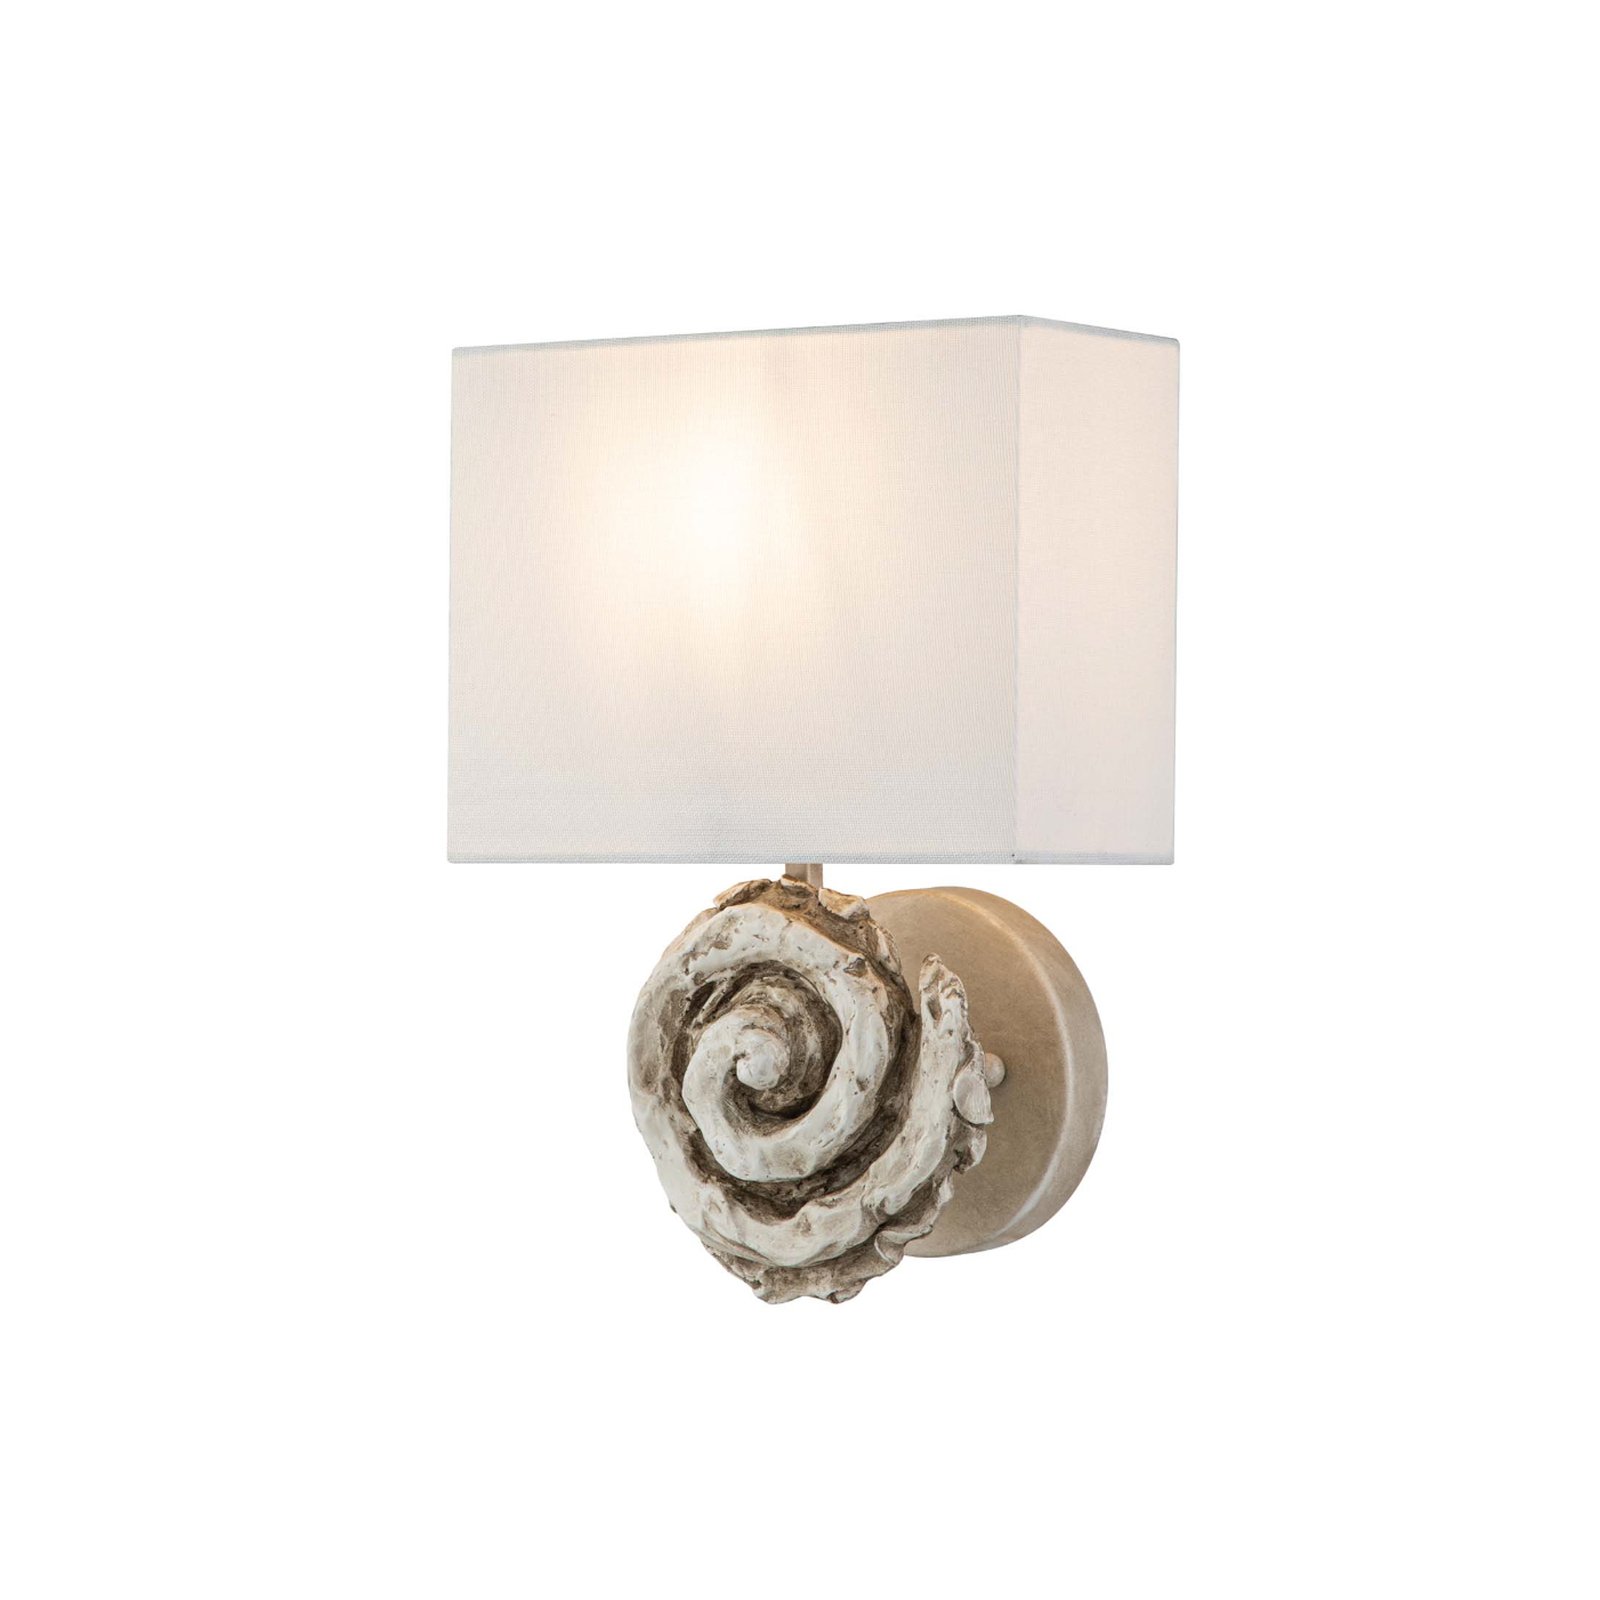 Swirl Large wall light with linen shade, antique white